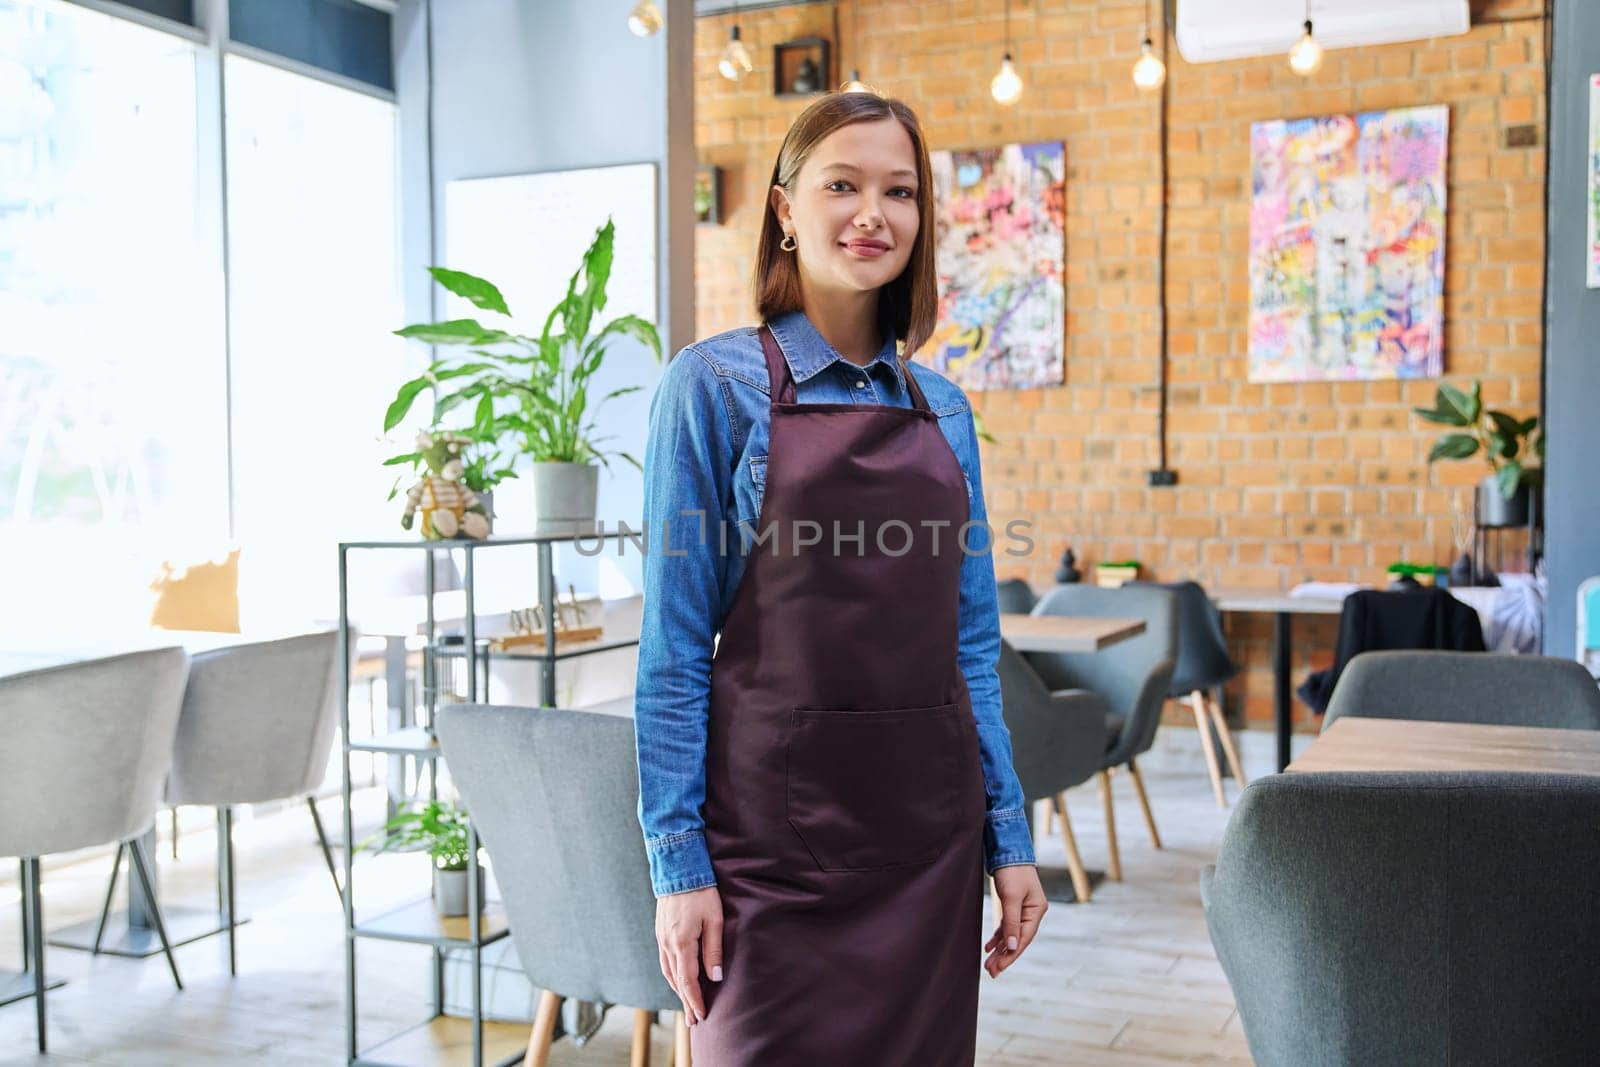 Attractive successful young woman service worker, business owner in apron looking at camera in restaurant cafeteria coffee pastry shop interior. Small business staff occupation entrepreneur work